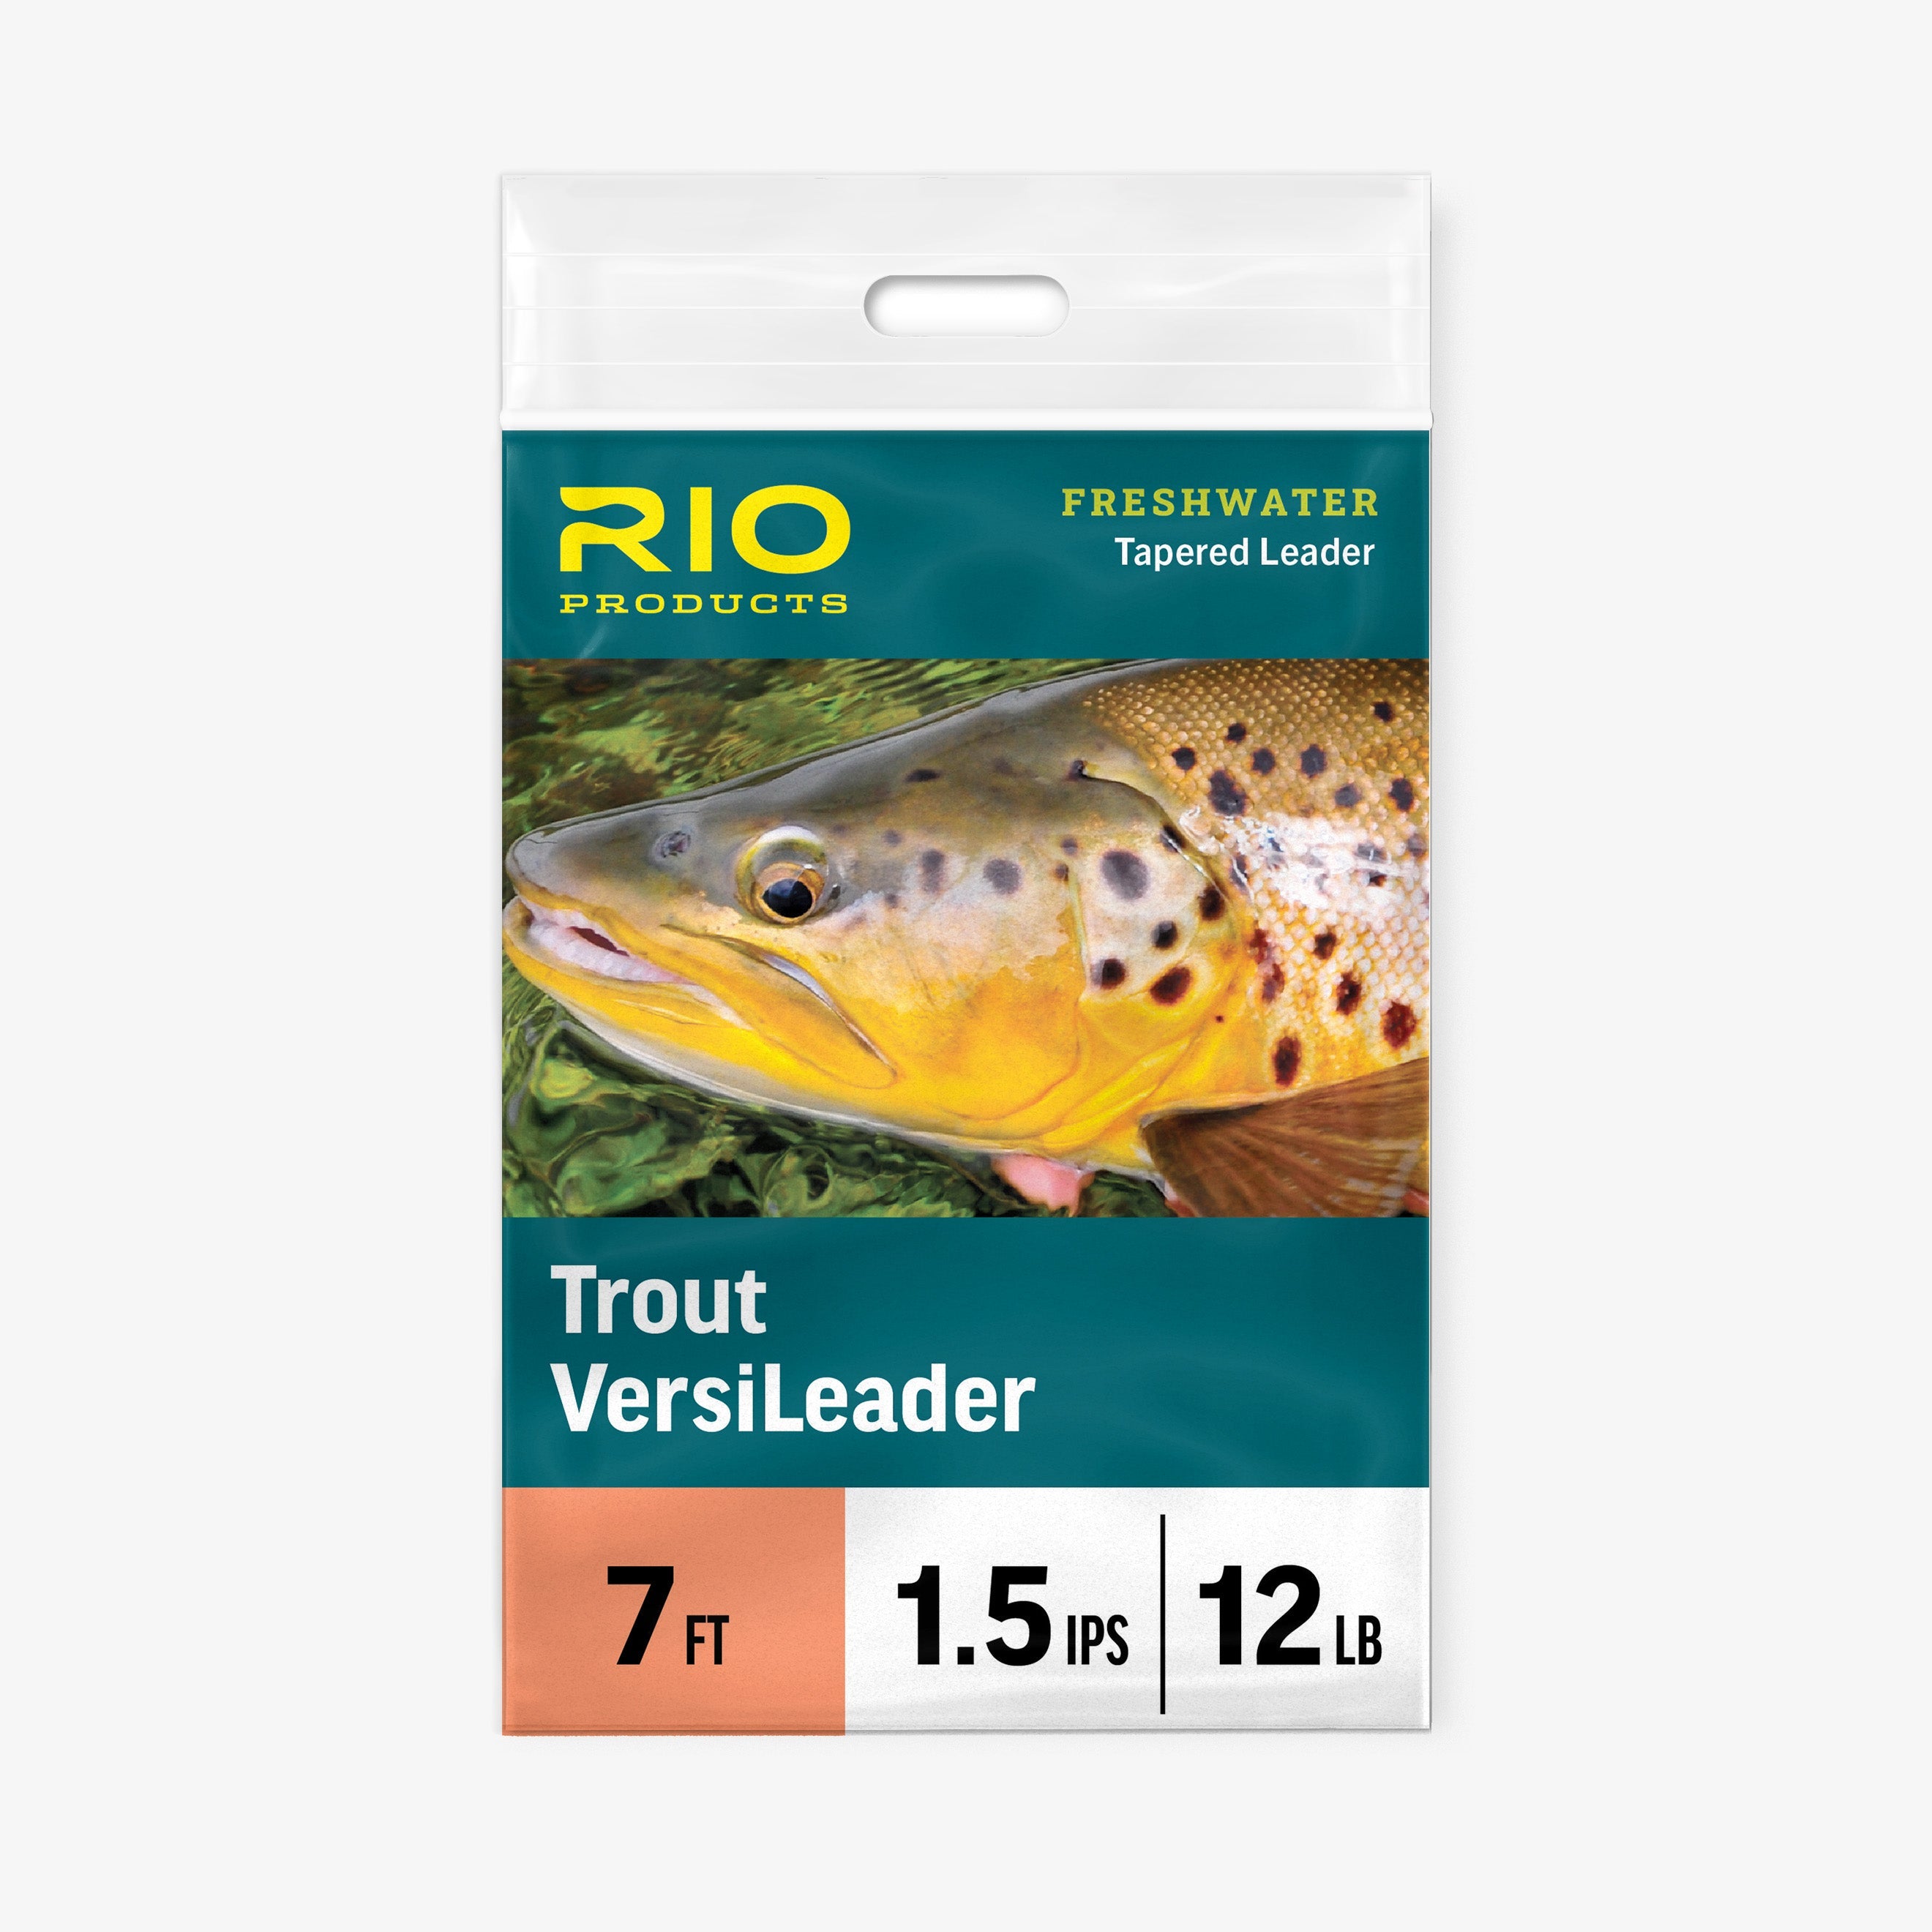 Trout Versileader - 7 Ft - ( RIO PRODUCTS)